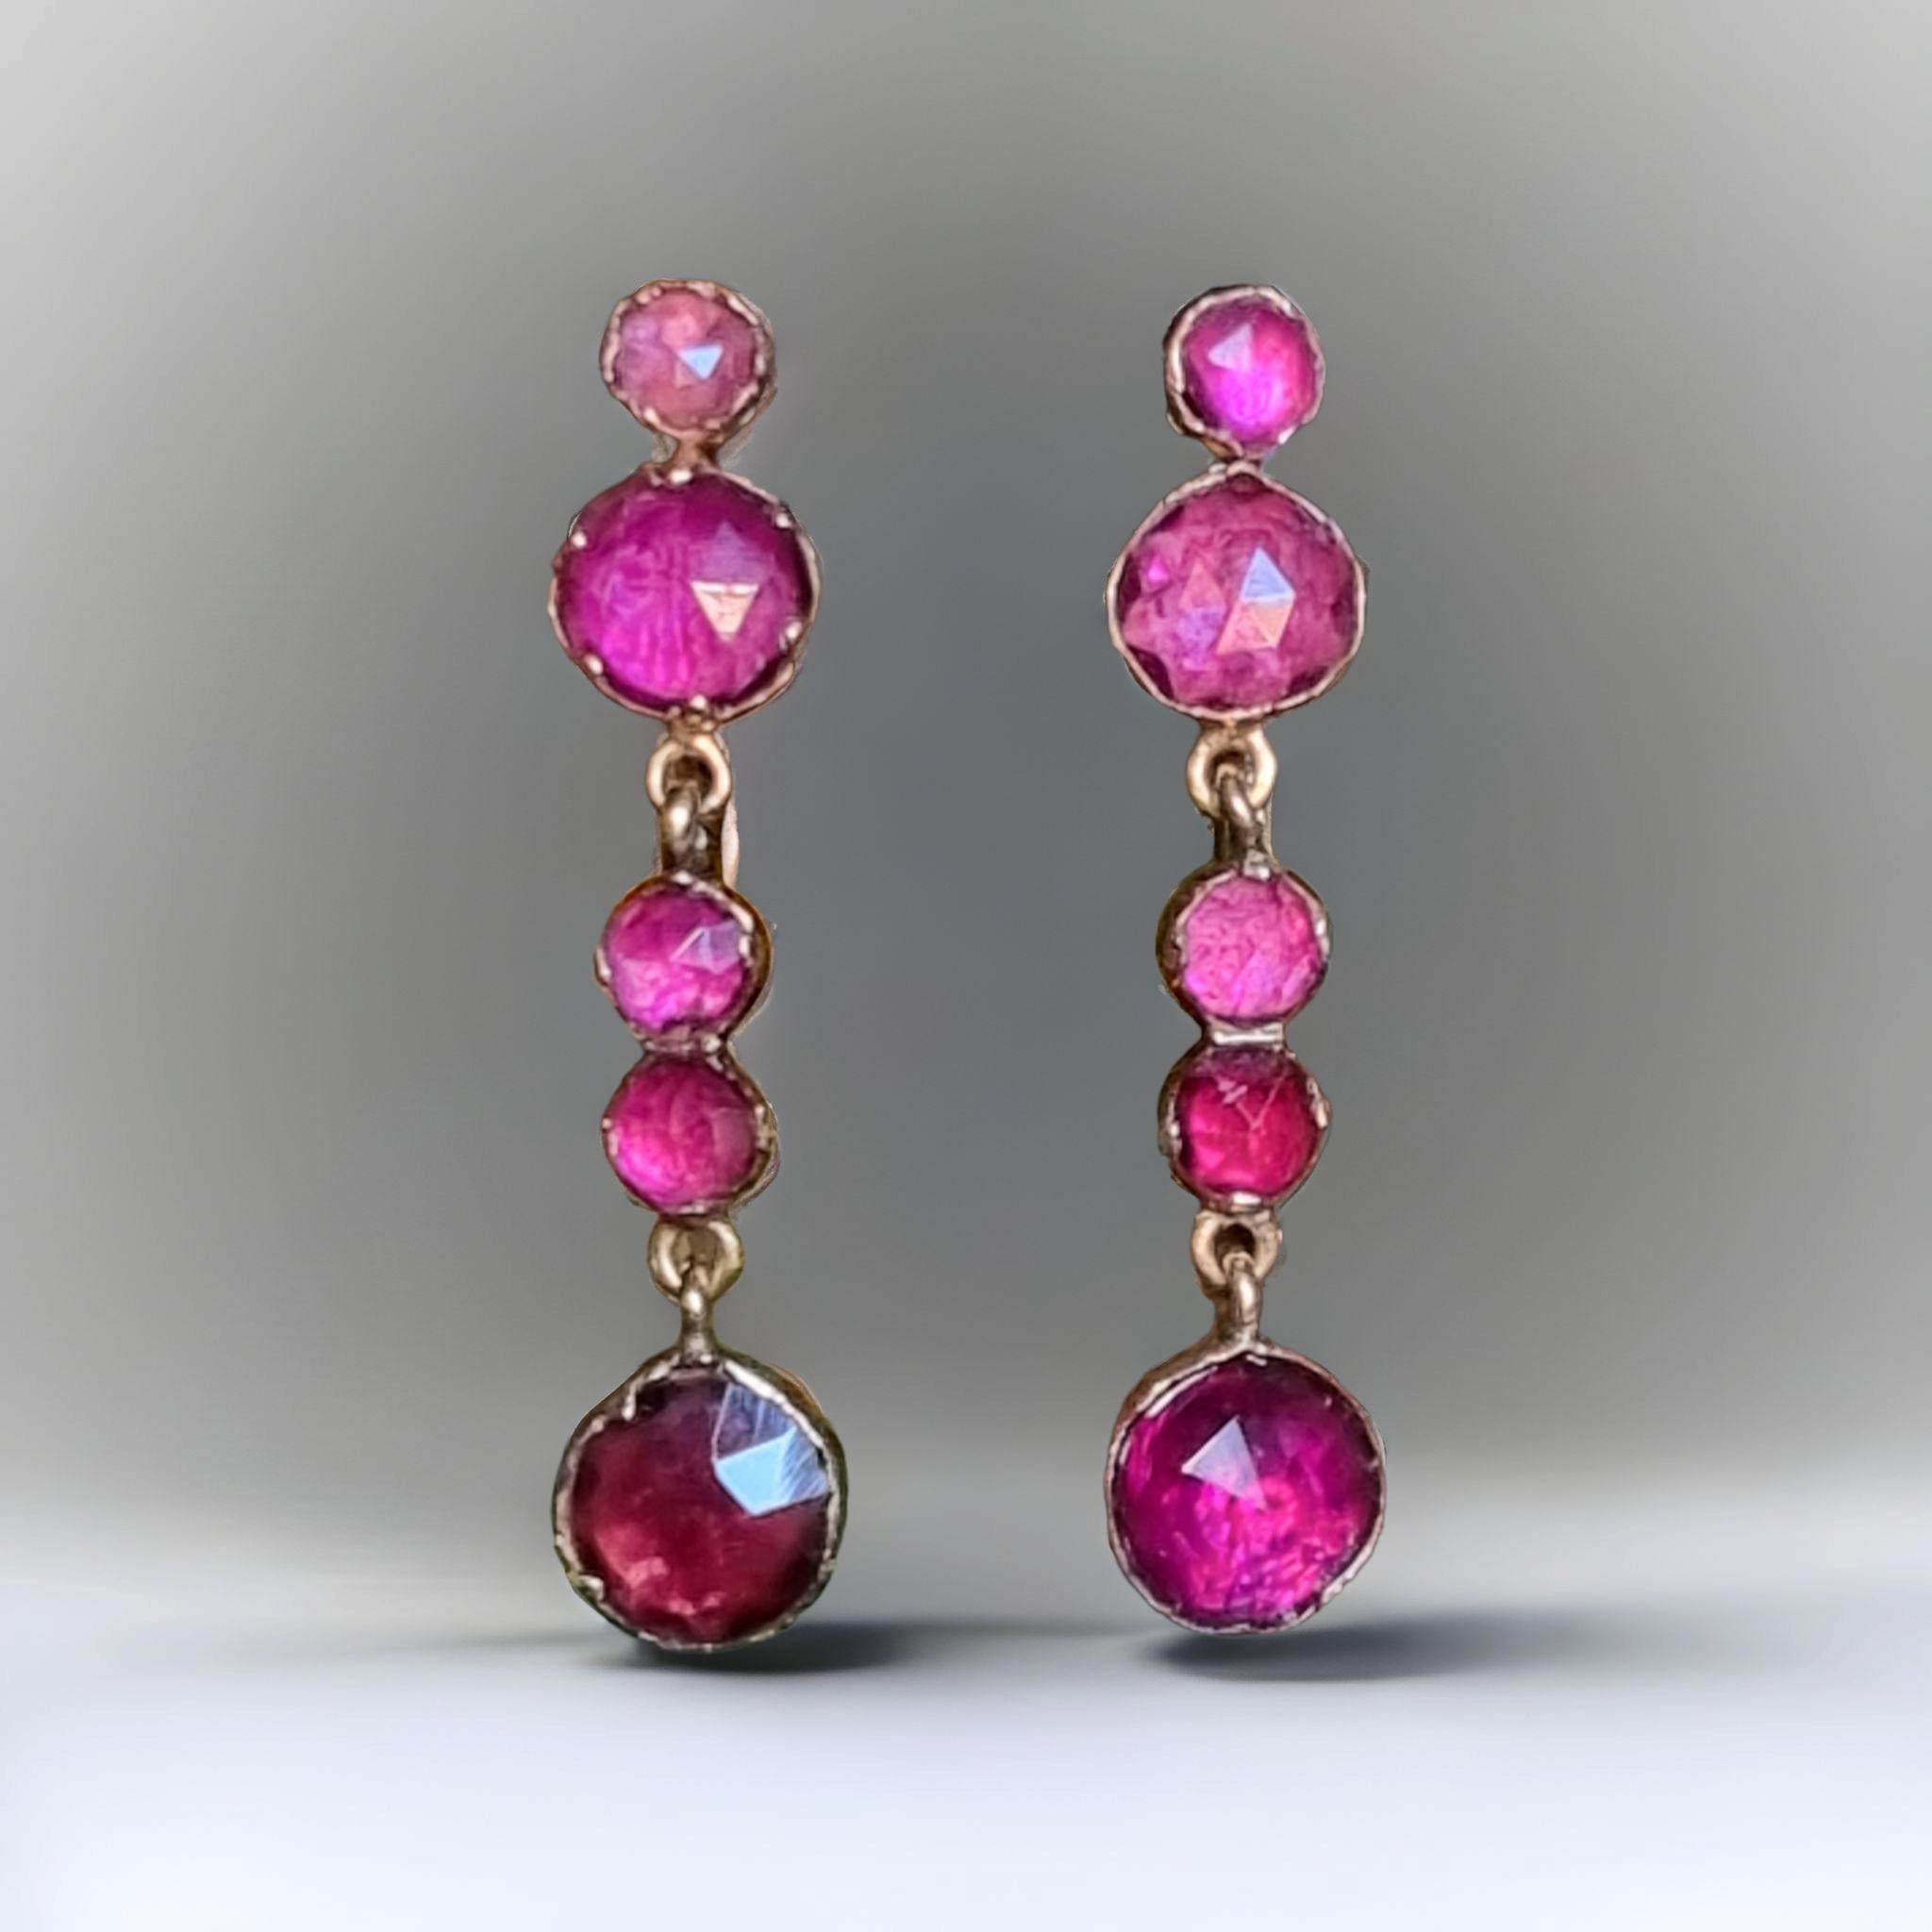 Antique Georgian Almandine Garnet Drop Earrings (1810-1820)
A pair of 14K gold graduated rose cut garnet drop earrings. Each earring  has five garnets set in pinched collet settings that have been foiled to give luminescence to the stones at the